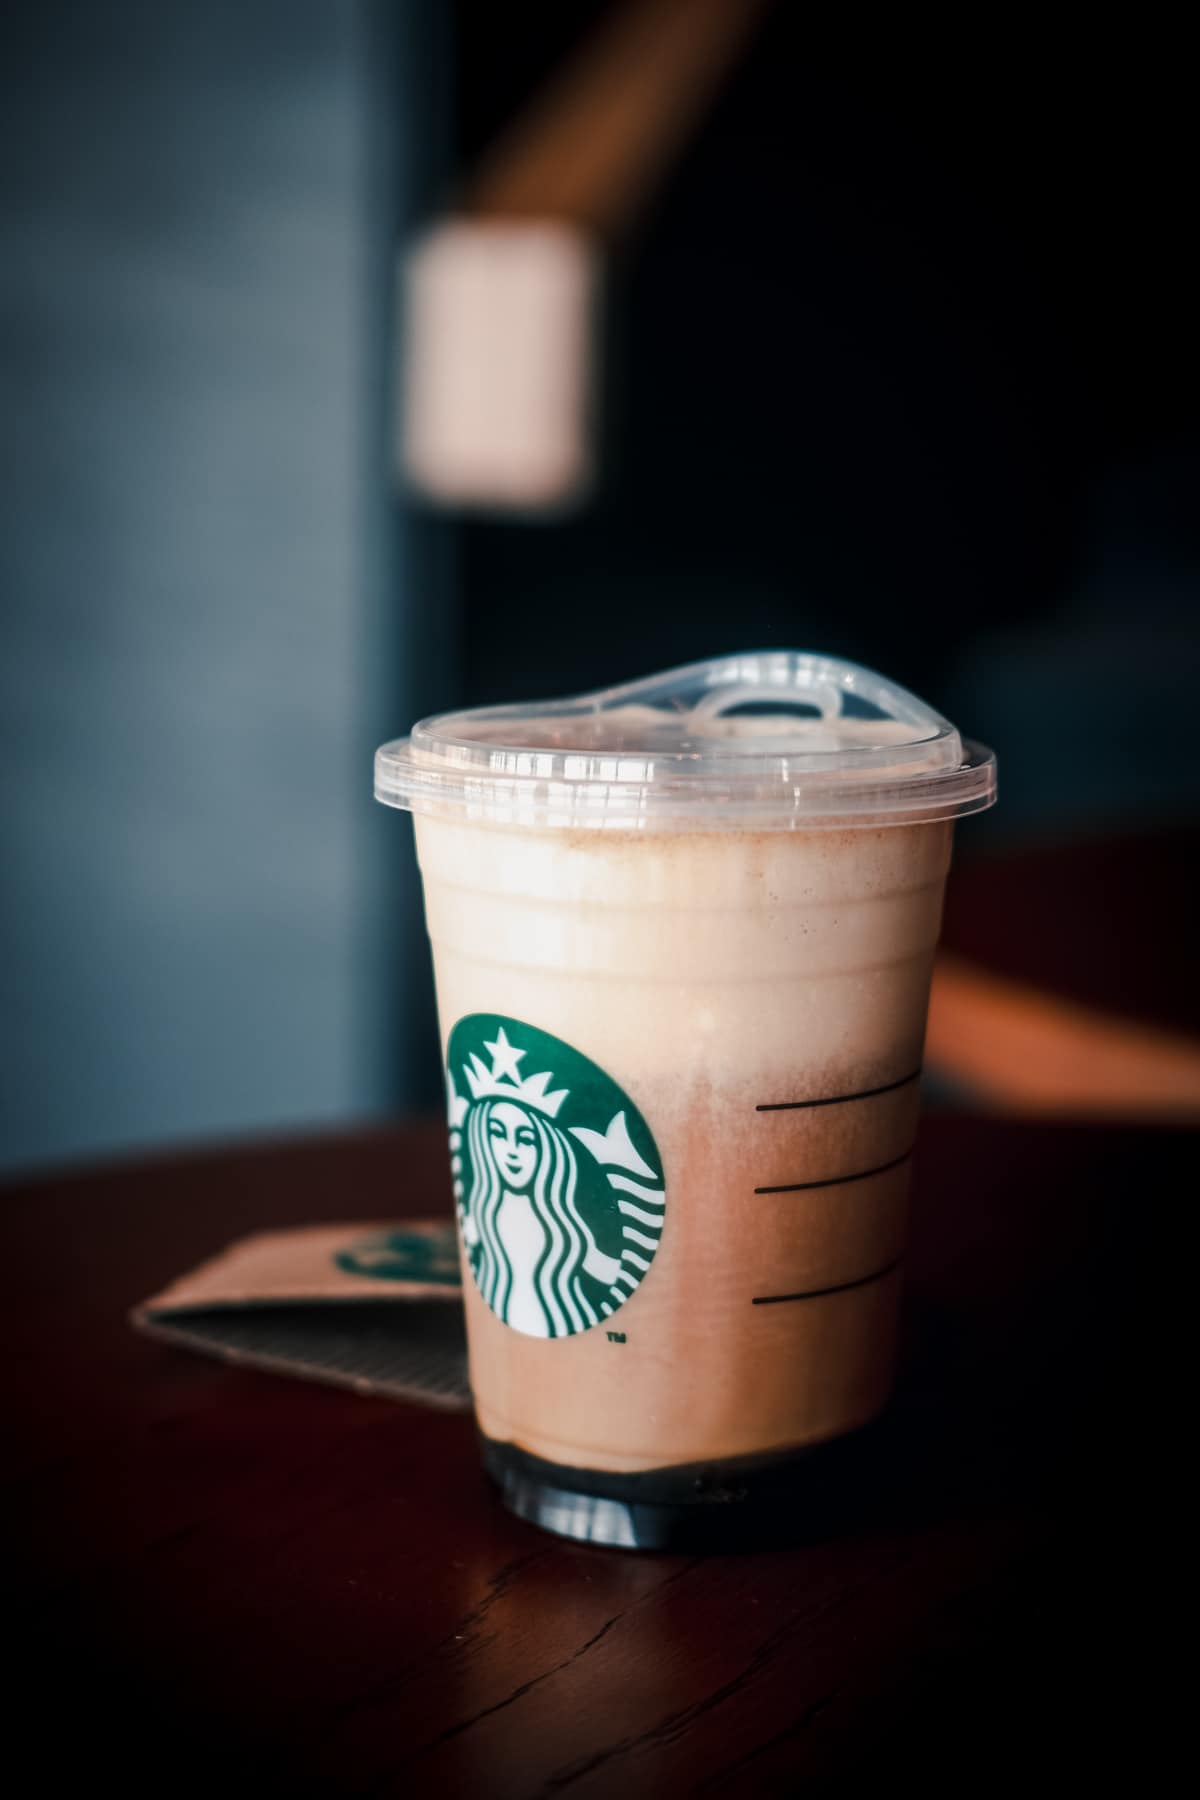 Iced nitro cold brew coffee in ready to drink at Starbucks to-go cup.